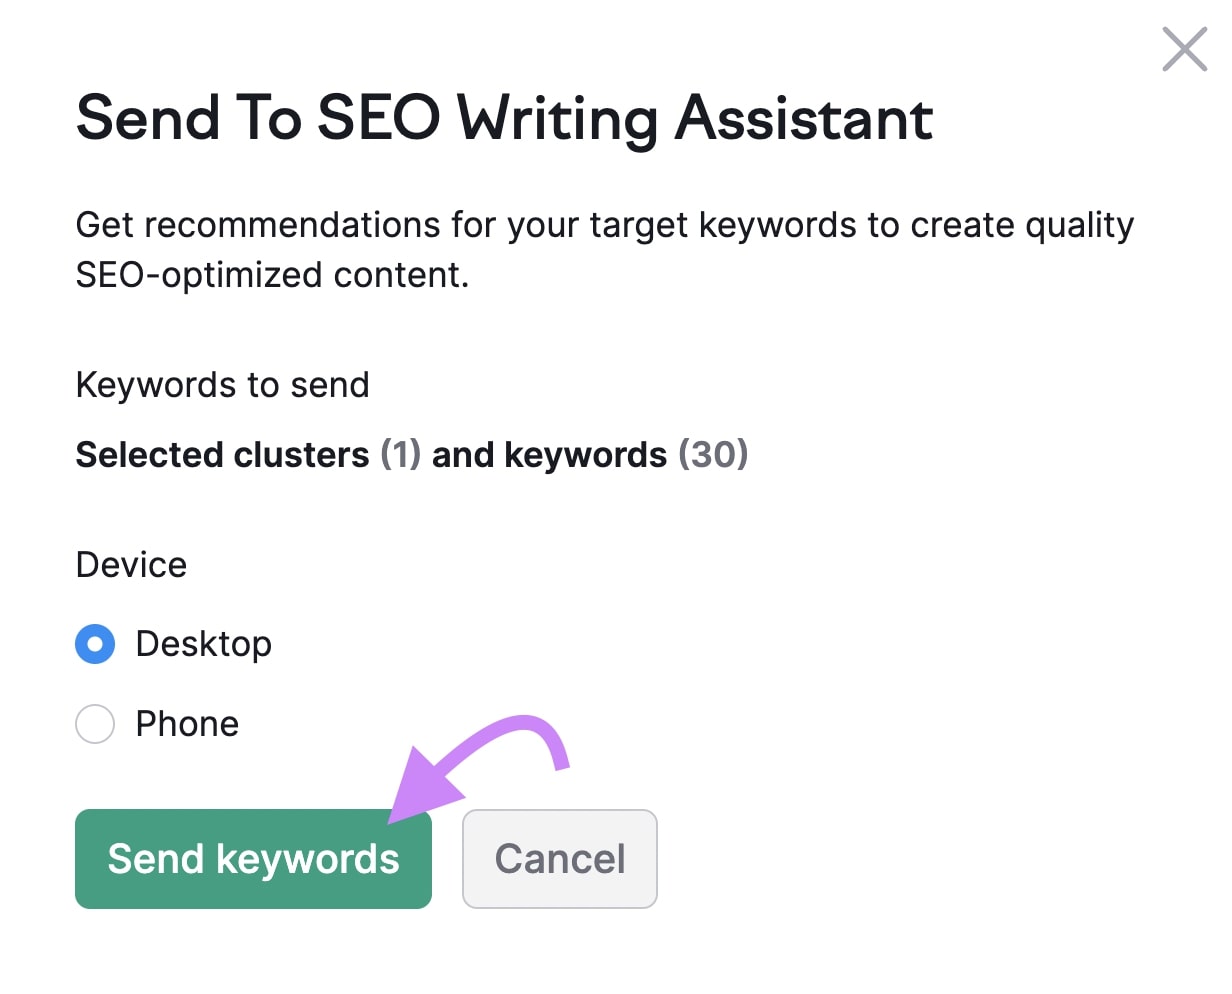 "Sent To SEO Writing Assistant" pop up window